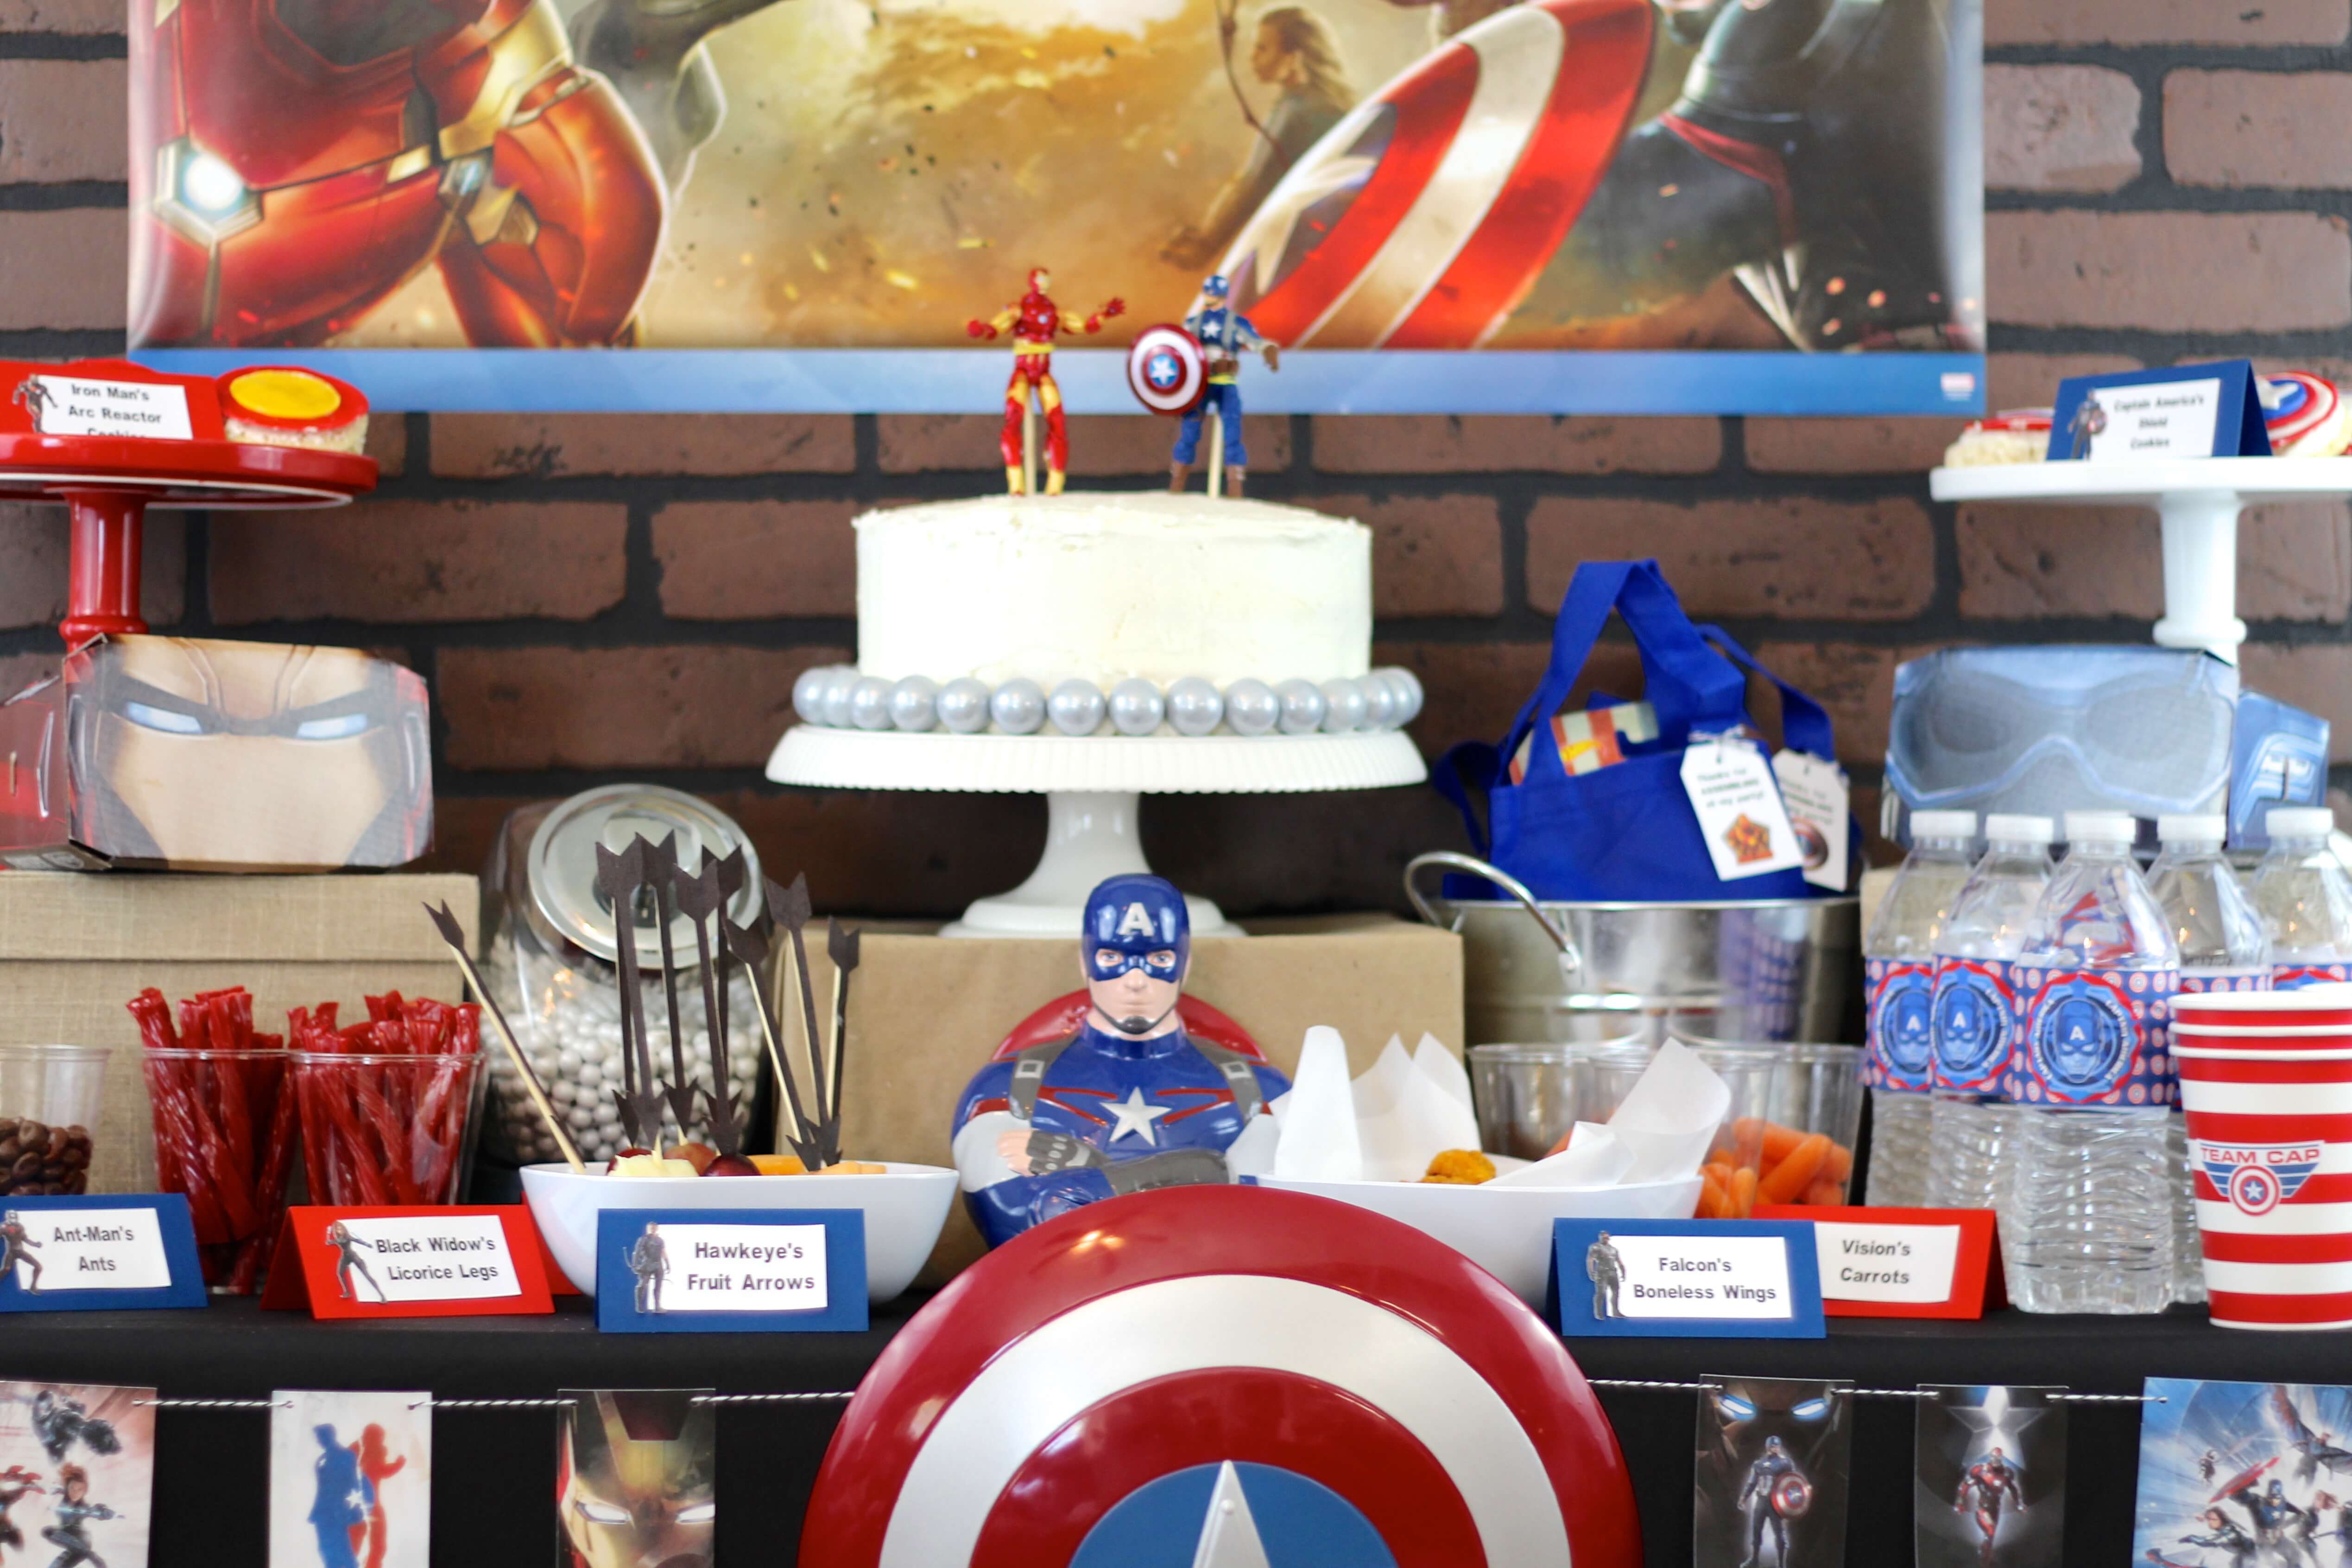 Everyday Party Magazine Captain America Civil War Party